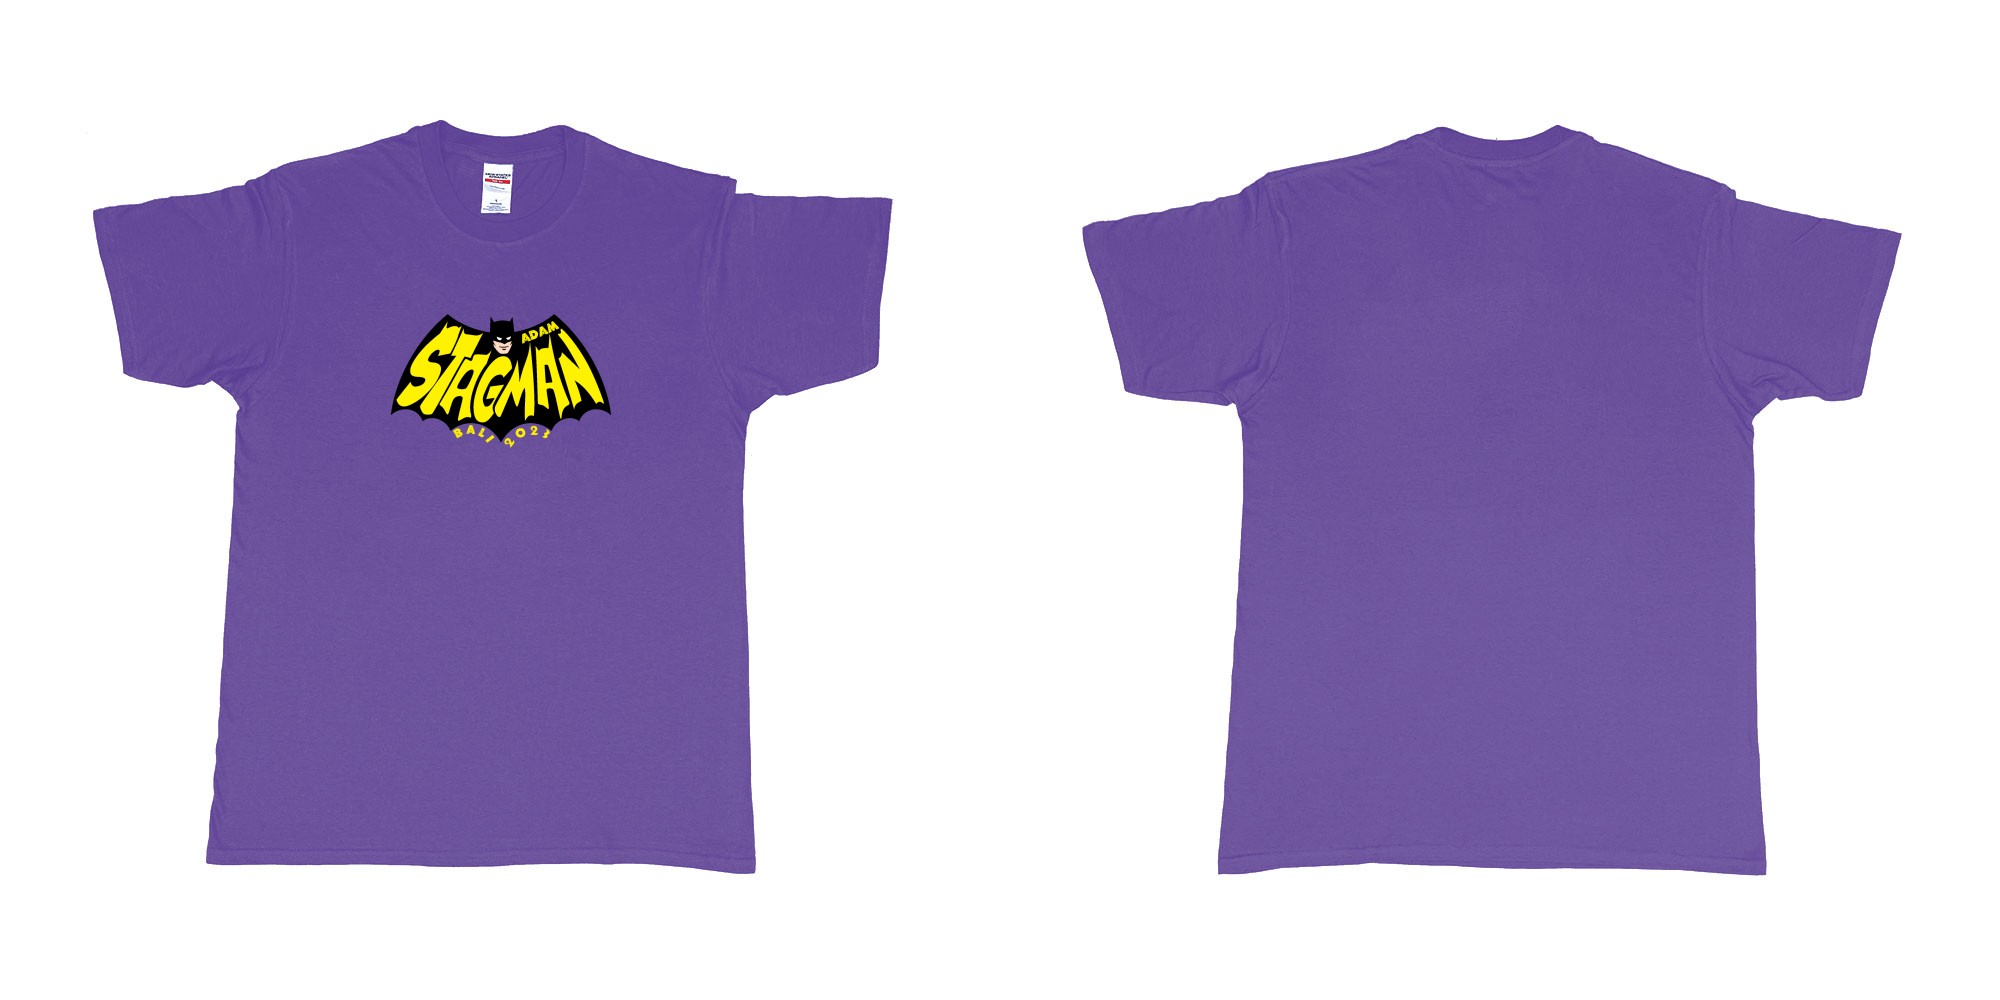 Custom tshirt design Batman StagMan Old School in fabric color purple choice your own text made in Bali by The Pirate Way